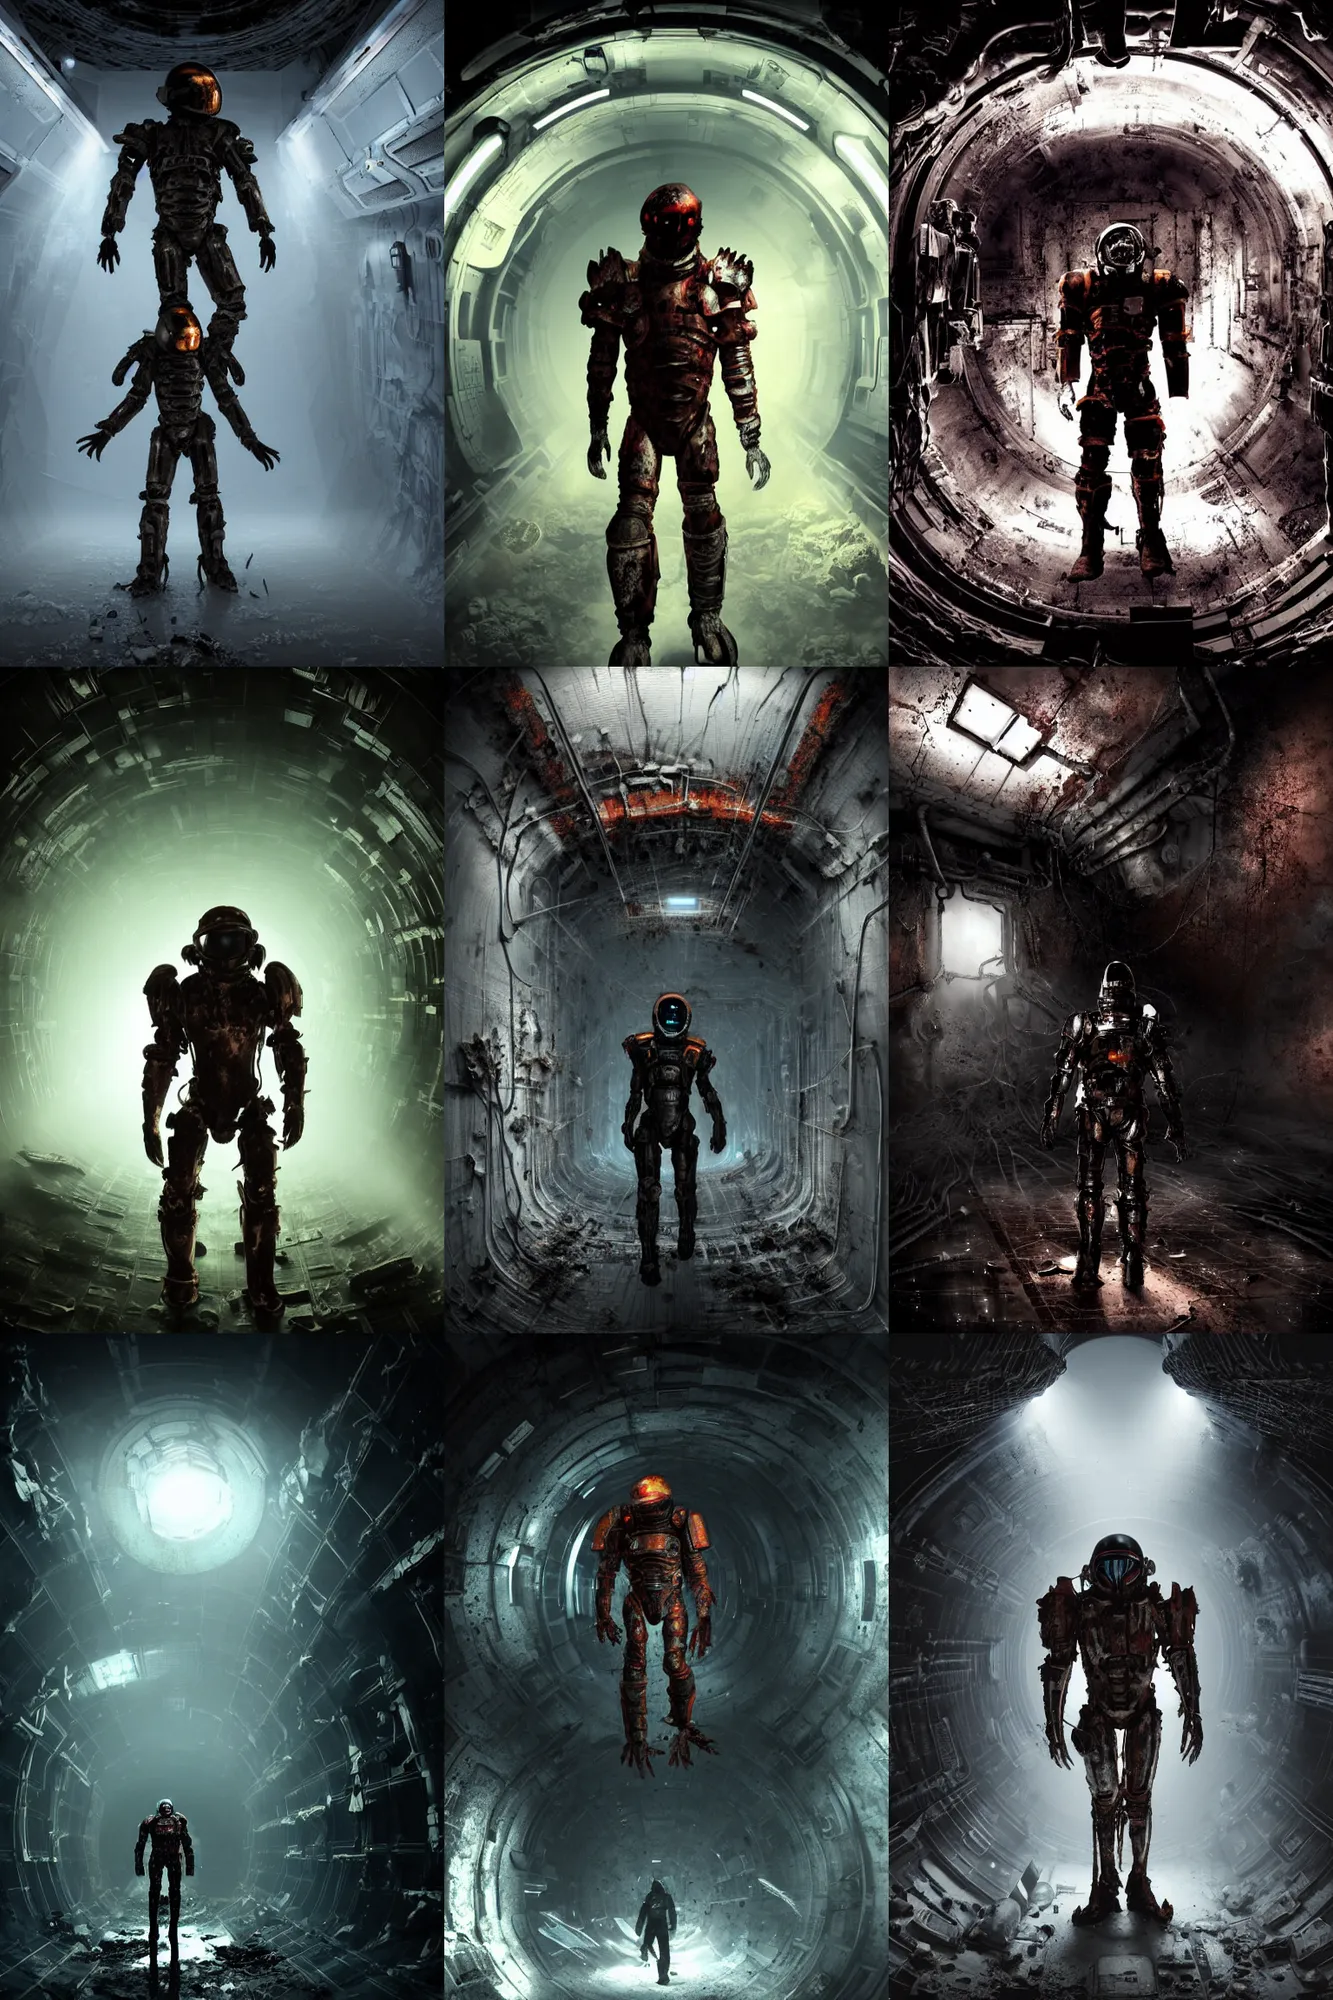 Prompt: horror movie scene of an individual in futuristic armor walking through a deep space mining space station, the walls are rusted metal, broken pipes come out of the walls like hands, birds eye 3 / 4 angle, dark colors, muted colors, tense atmosphere, mist floats in the air, amazing value control, dead space, moody colors, dramatic lighting, frank frazetta